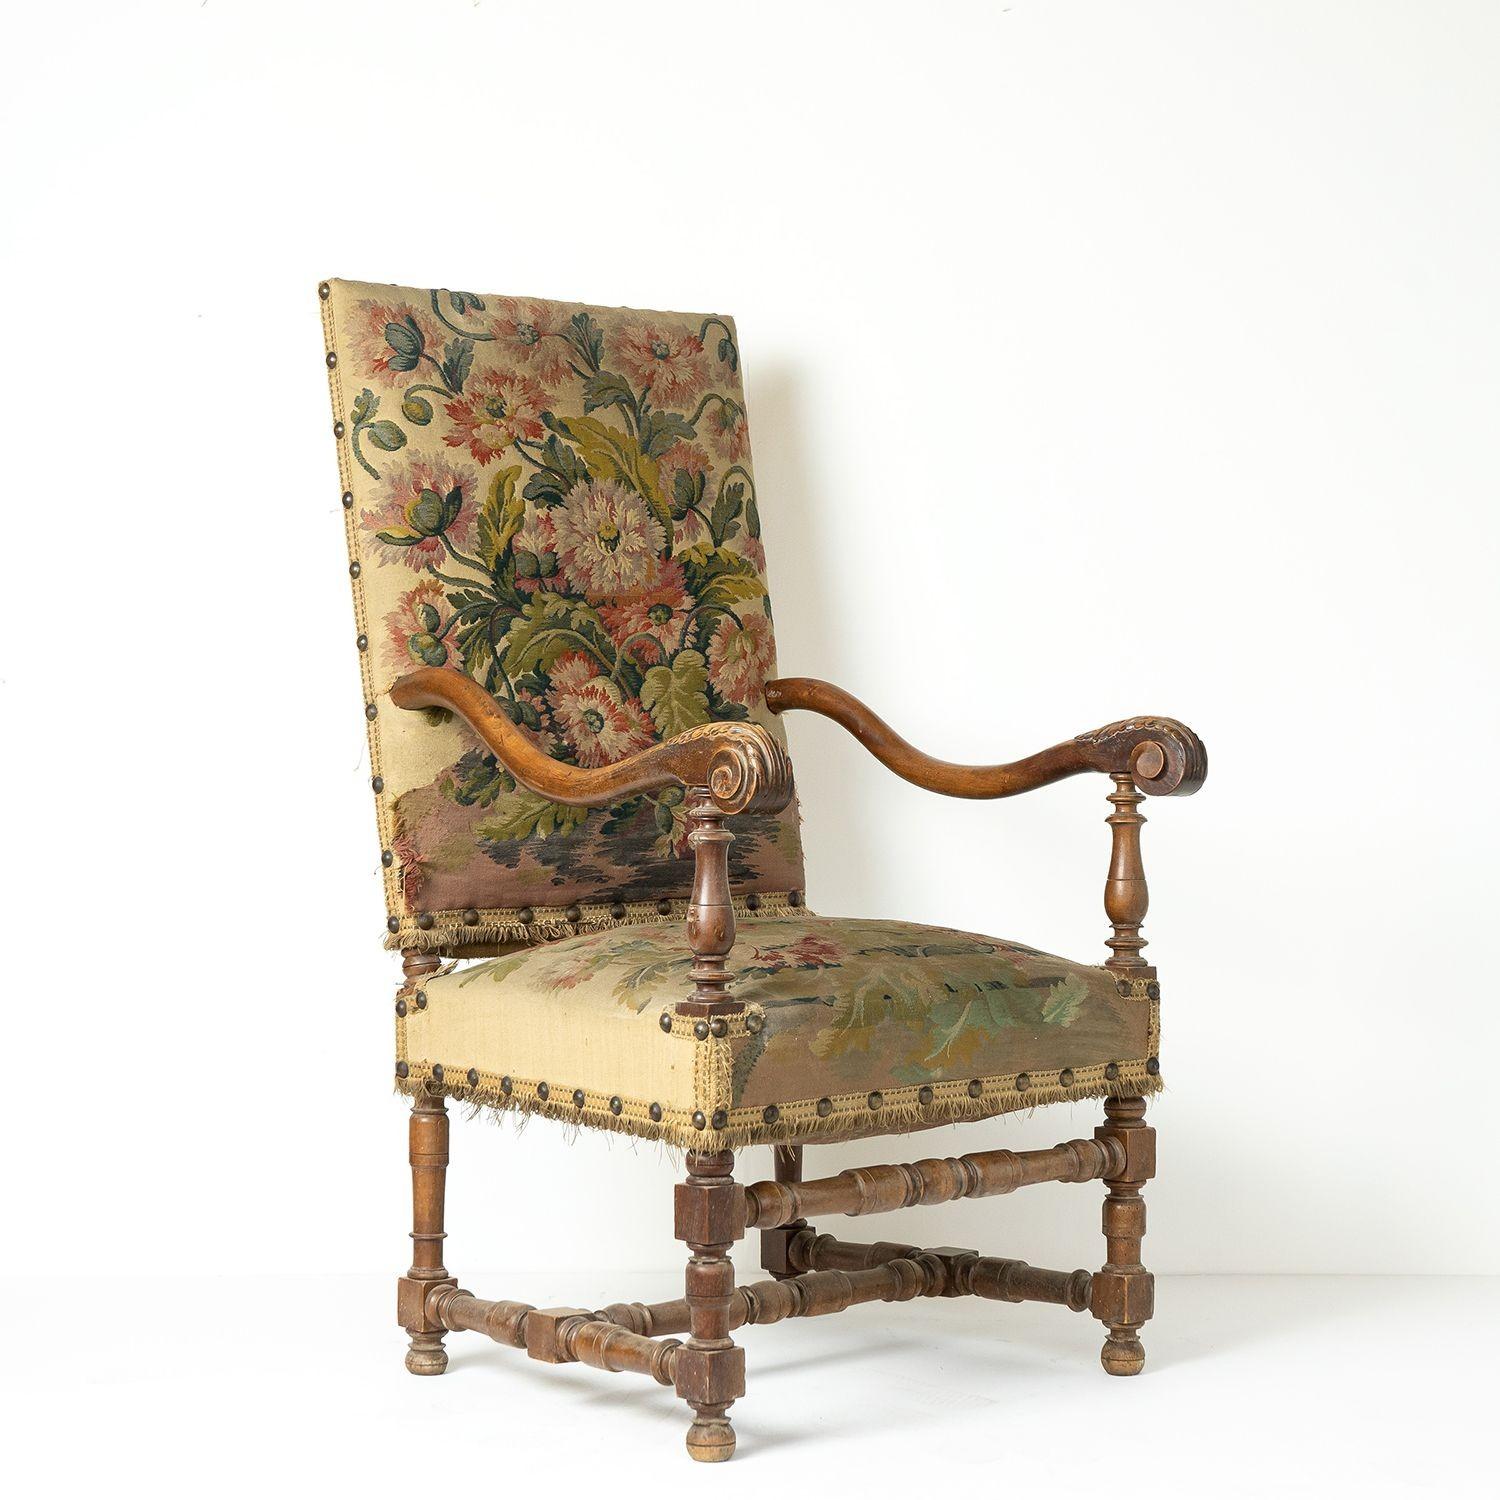 French Walnut Framed Armchair With Poppy Tapestry Upholstery, 19th Century In Good Condition For Sale In Bristol, GB